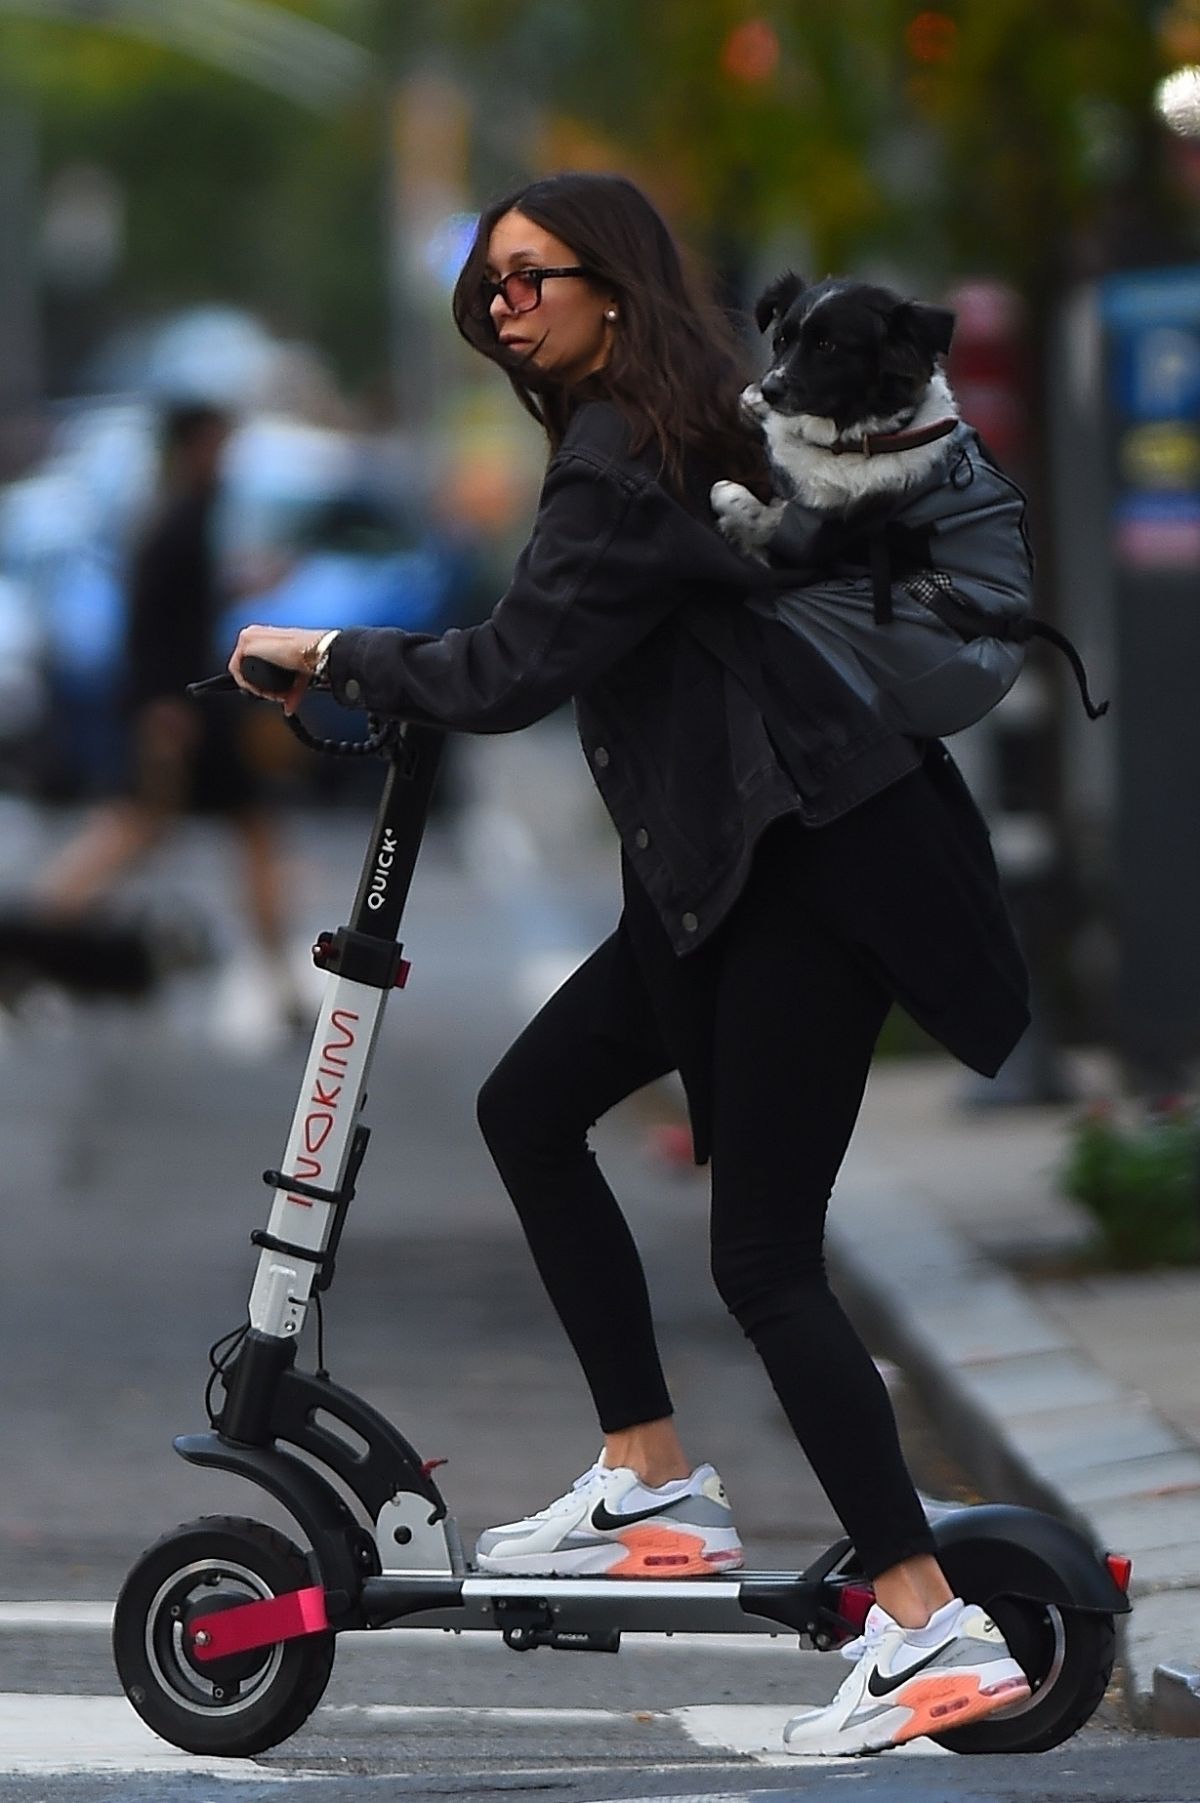 Nina Dobrev and Shaun White look happy as they take a scooter ride